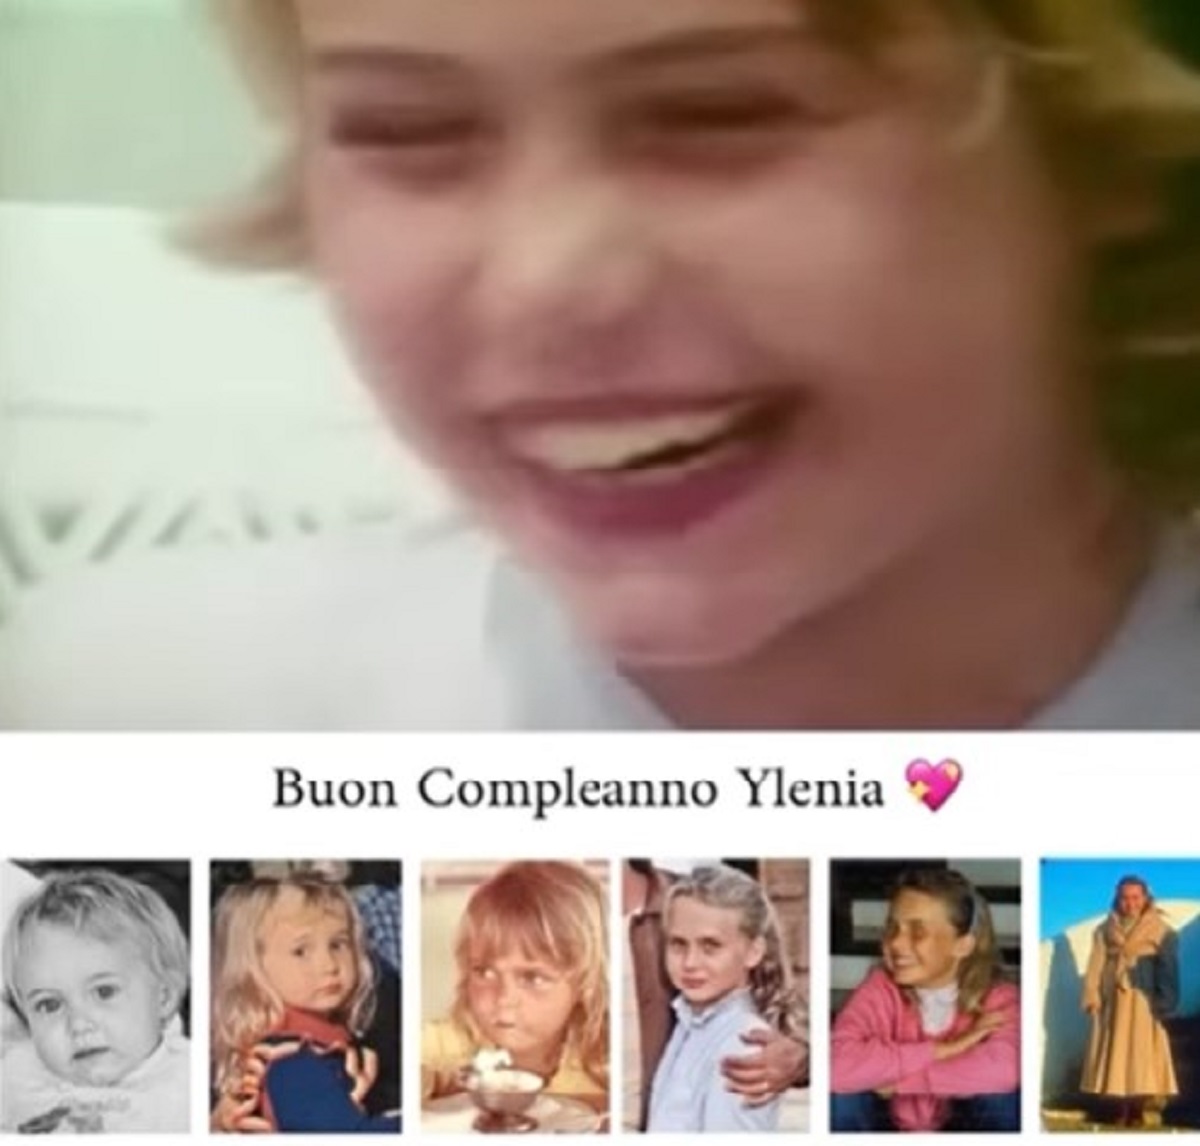 Romina Power lettera compleanno Ylenia Carrisi